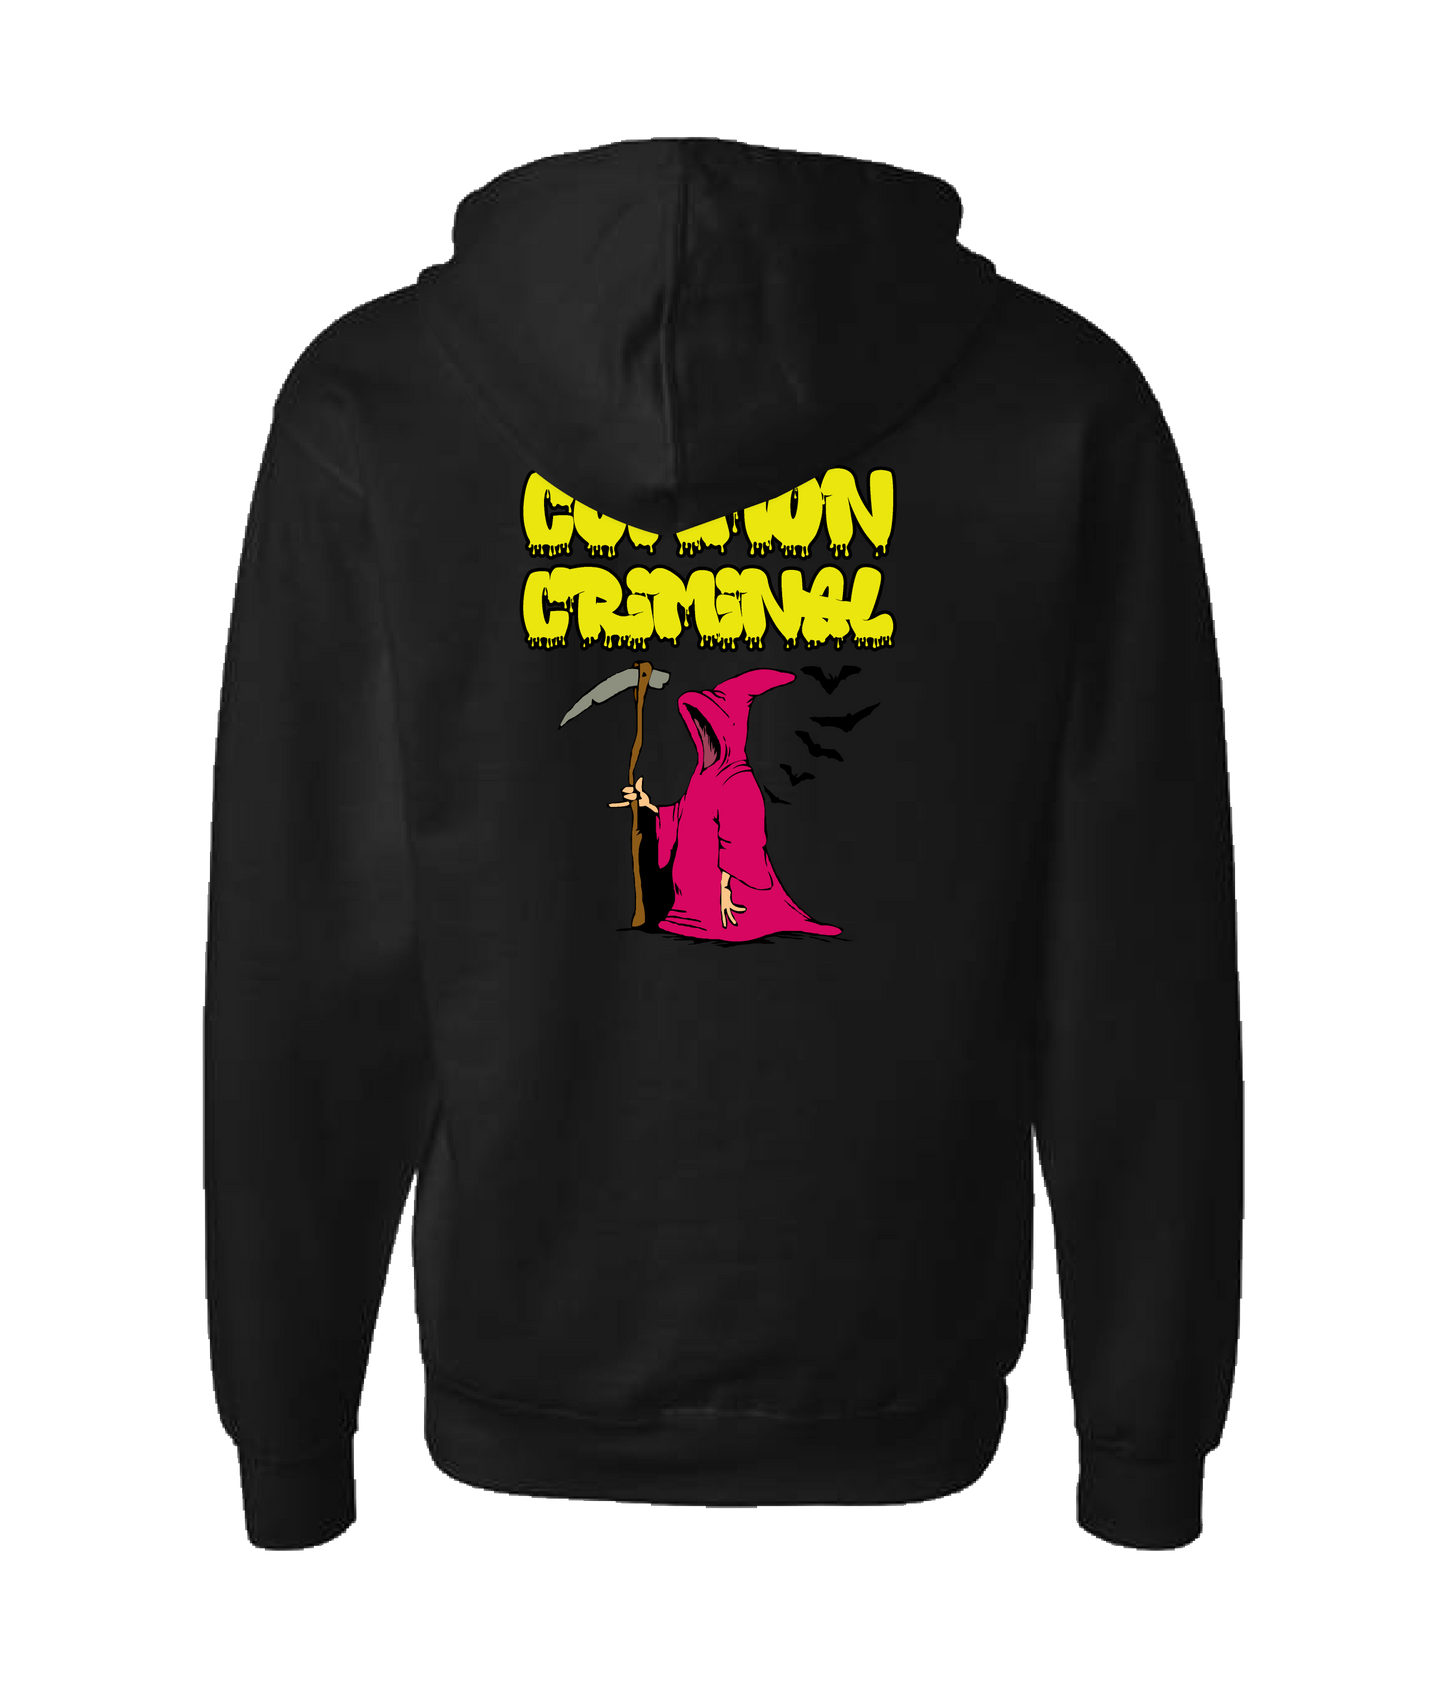 Common Criminal - Don't Fear The Reaper - Black Zip Up Hoodie